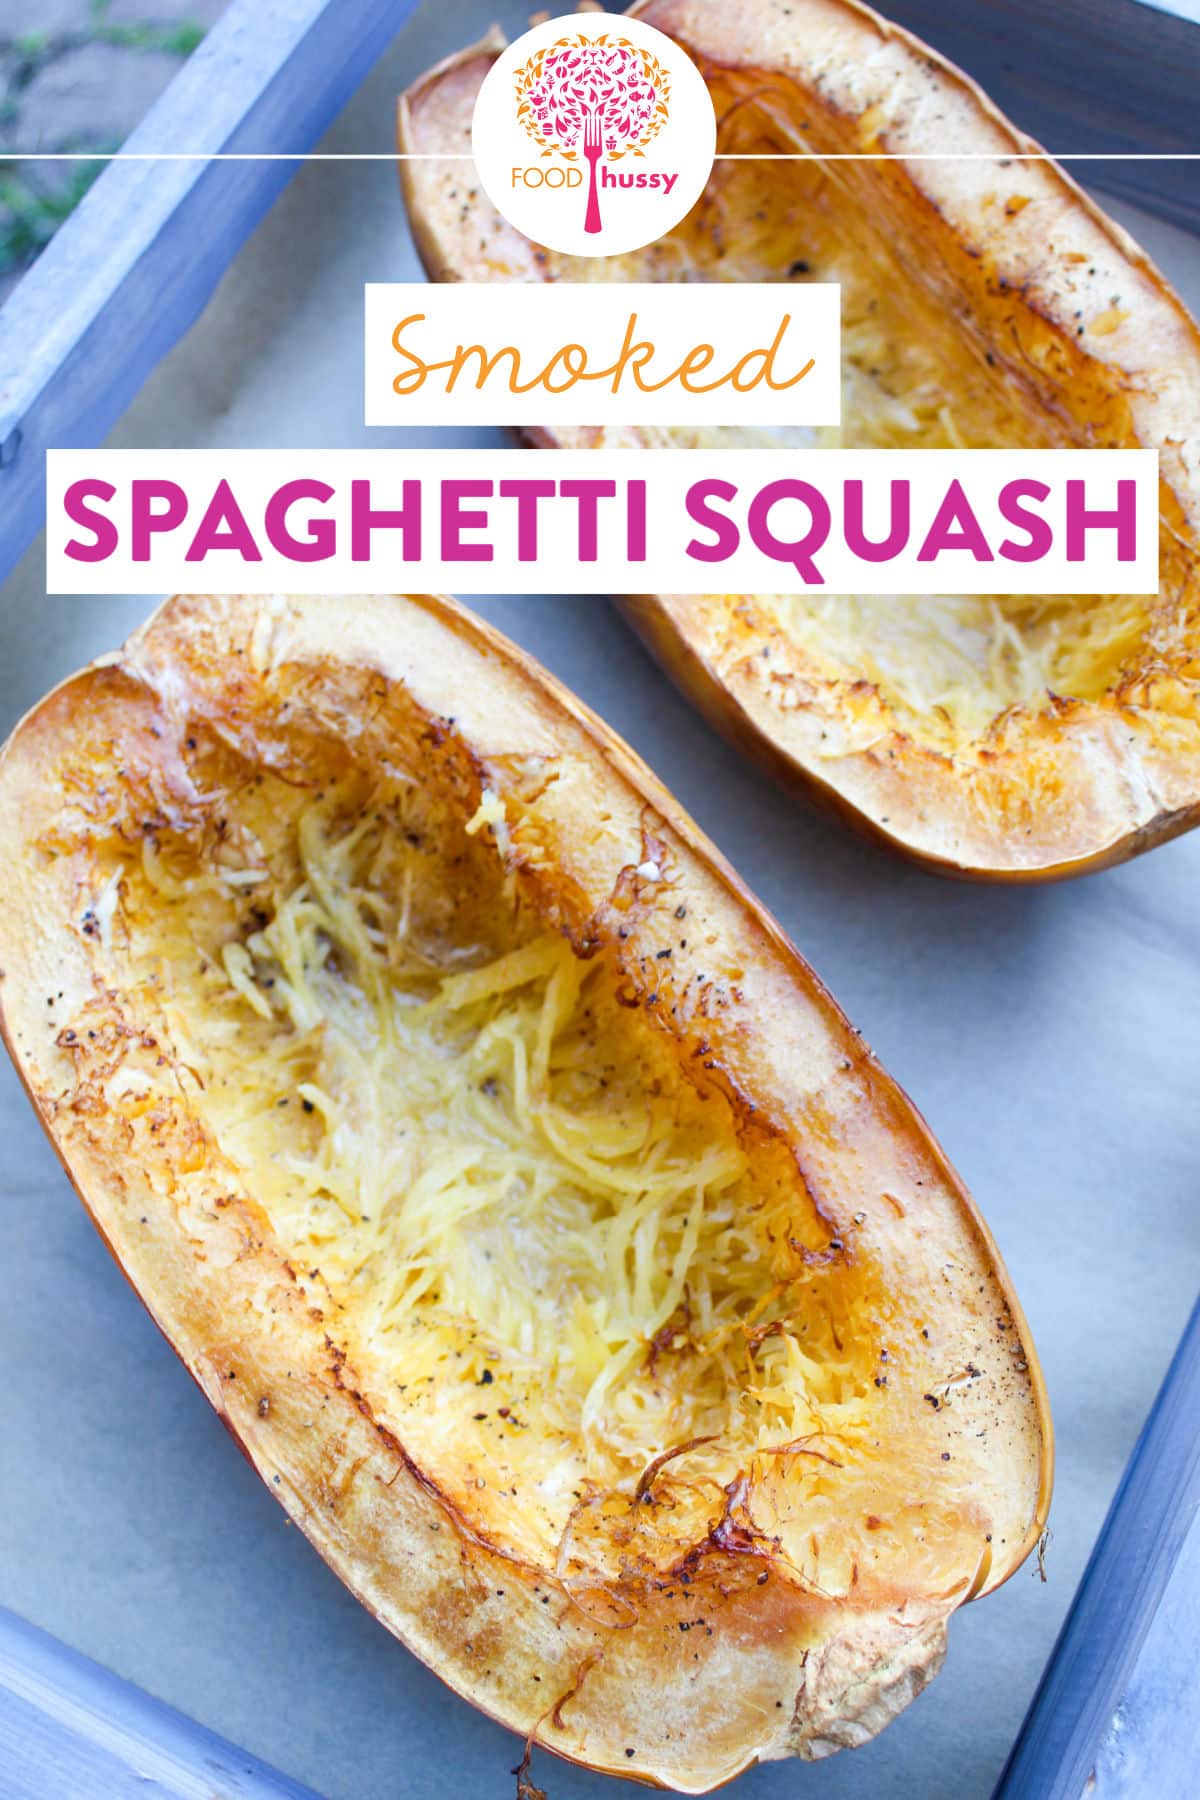 Smoked Spaghetti Squash is an easy & tasty side dish that takes on all that delicious smoky flavor from your smoker! Spaghetti squash is a great low-calorie and low-carb substitute for pasta.  via @foodhussy